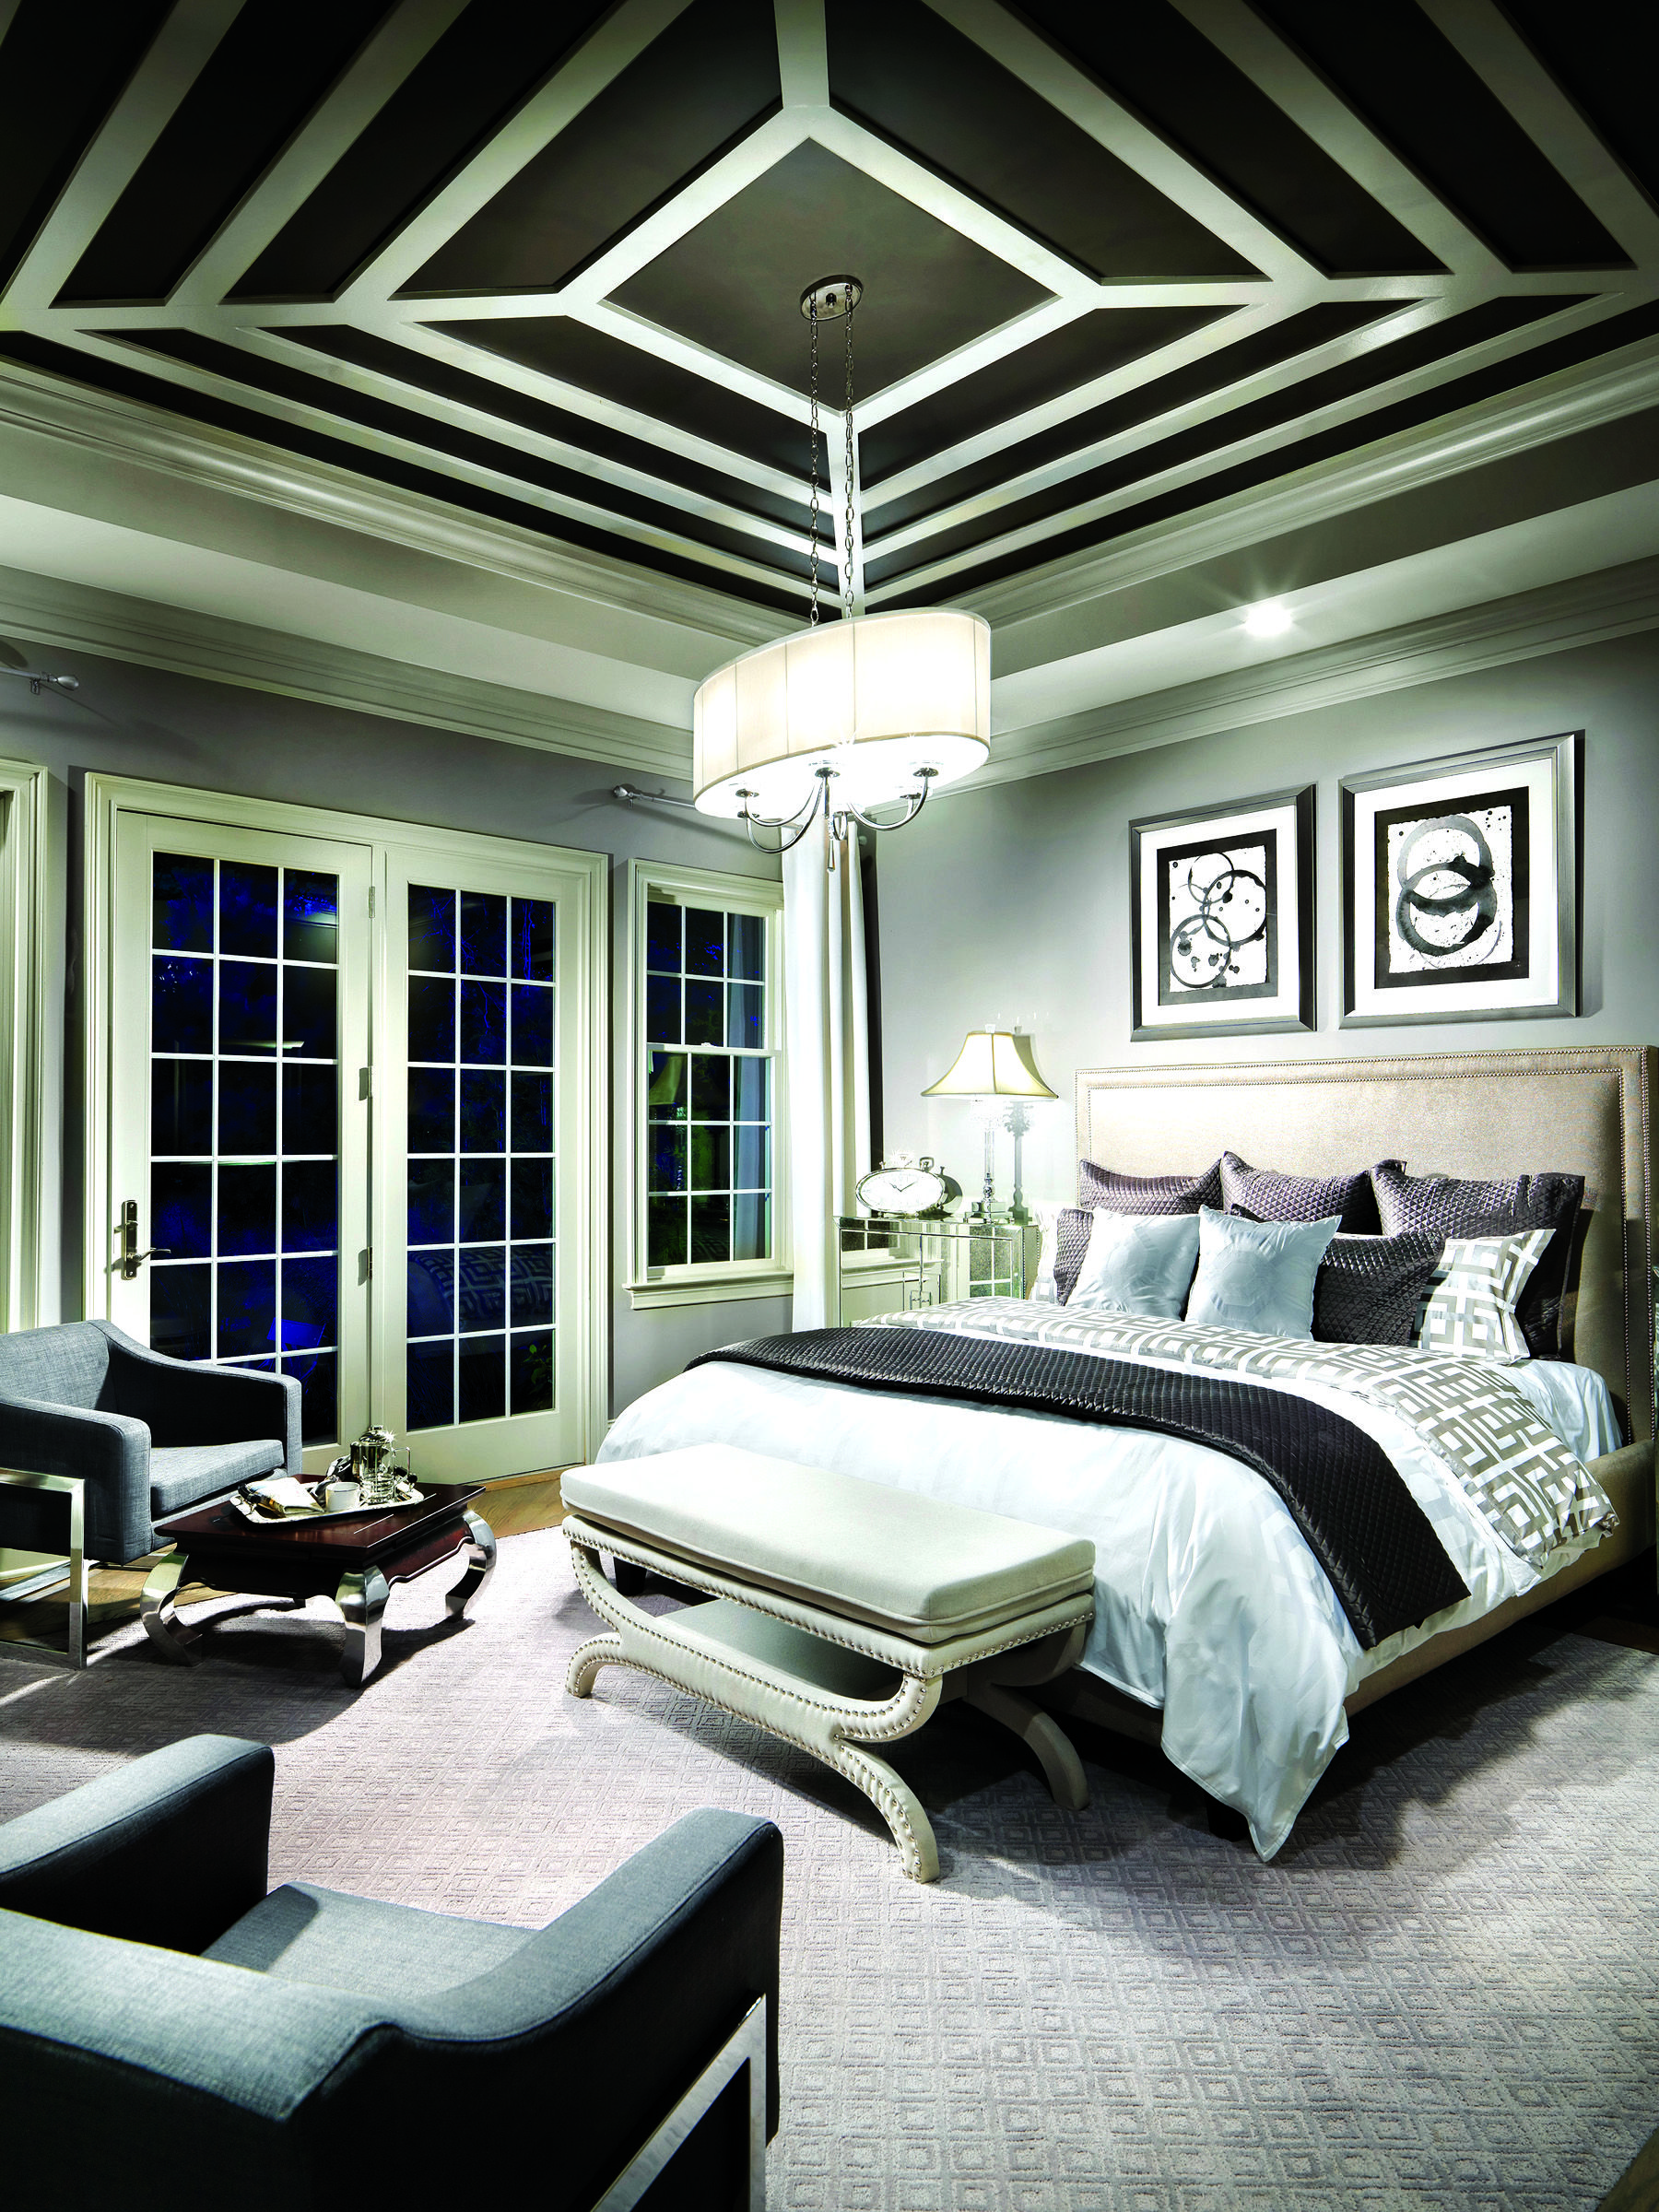 Bold Statements: Make Your Mark With Dramatic Bedroom Ceiling Ideas